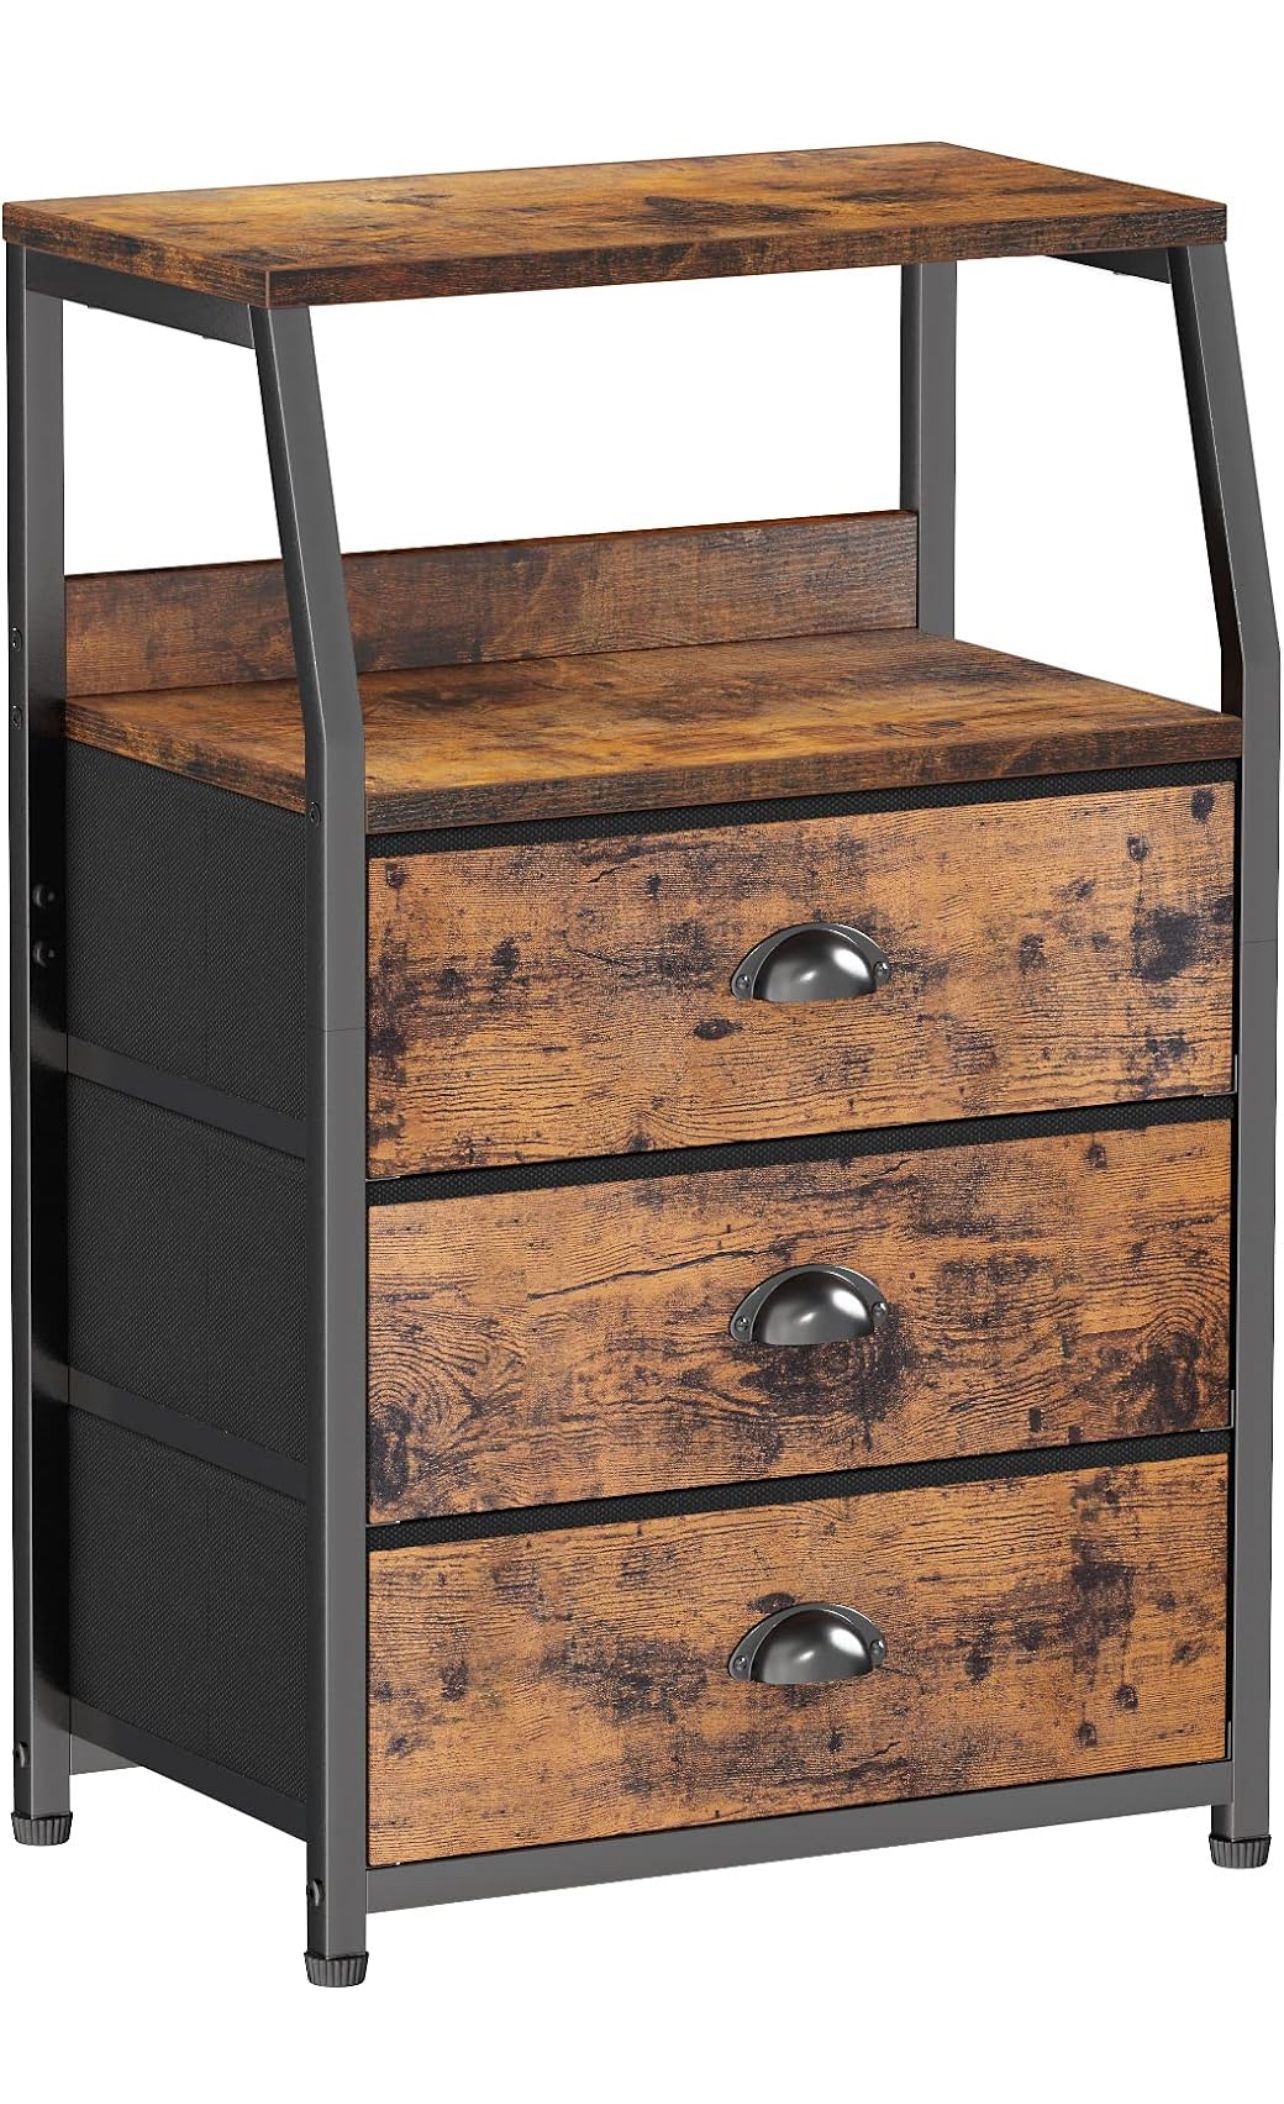 Table with 3 Storage Drawers, Nightstand (٩٦٧)رقم ج